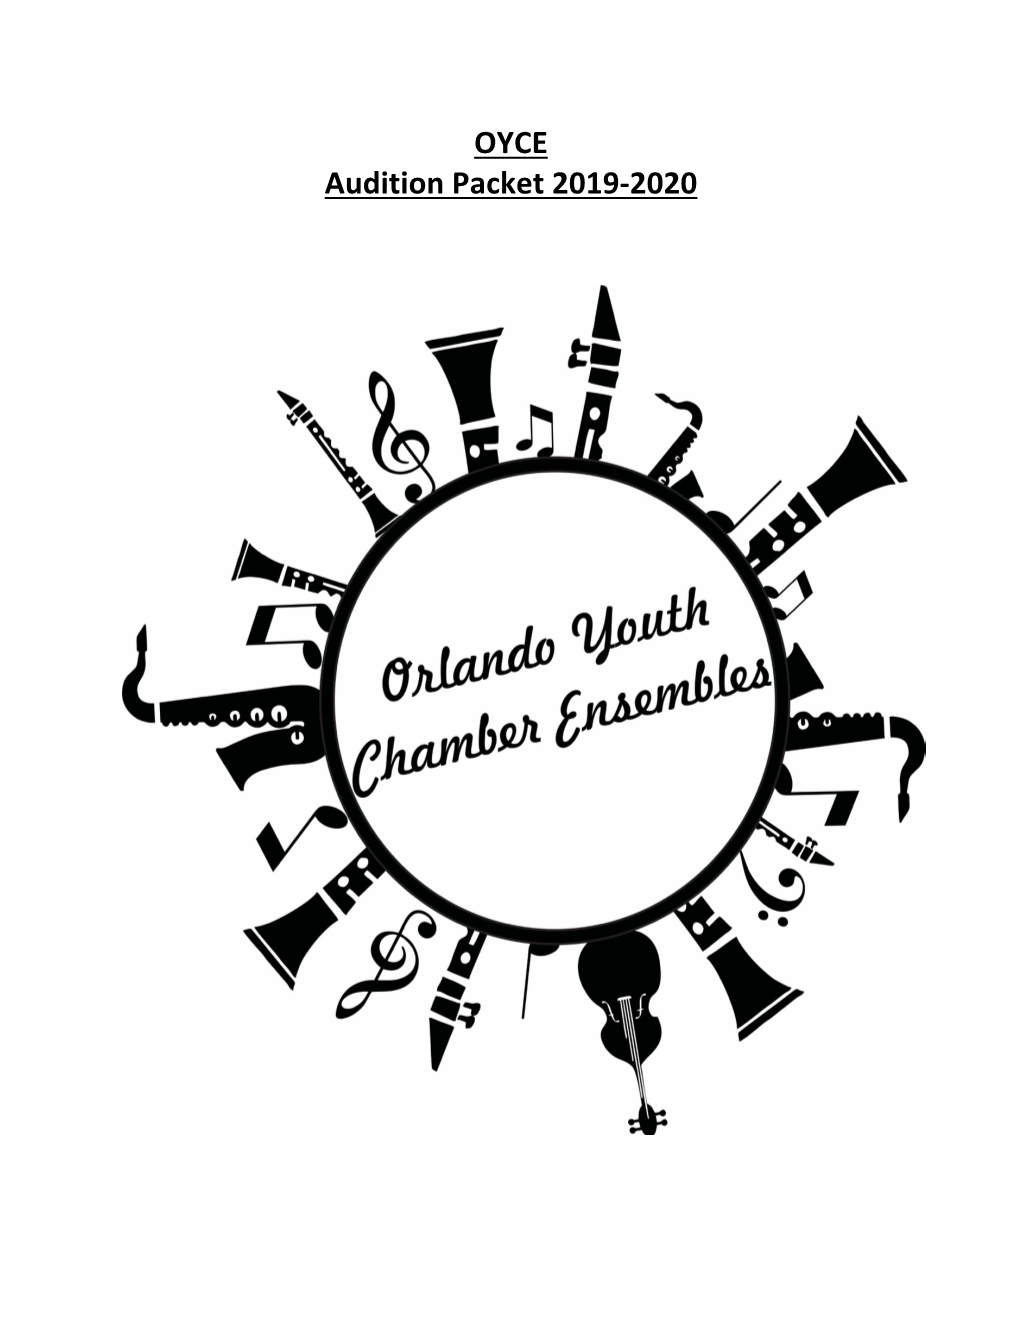 OYCE Audition Packet 2019-2020